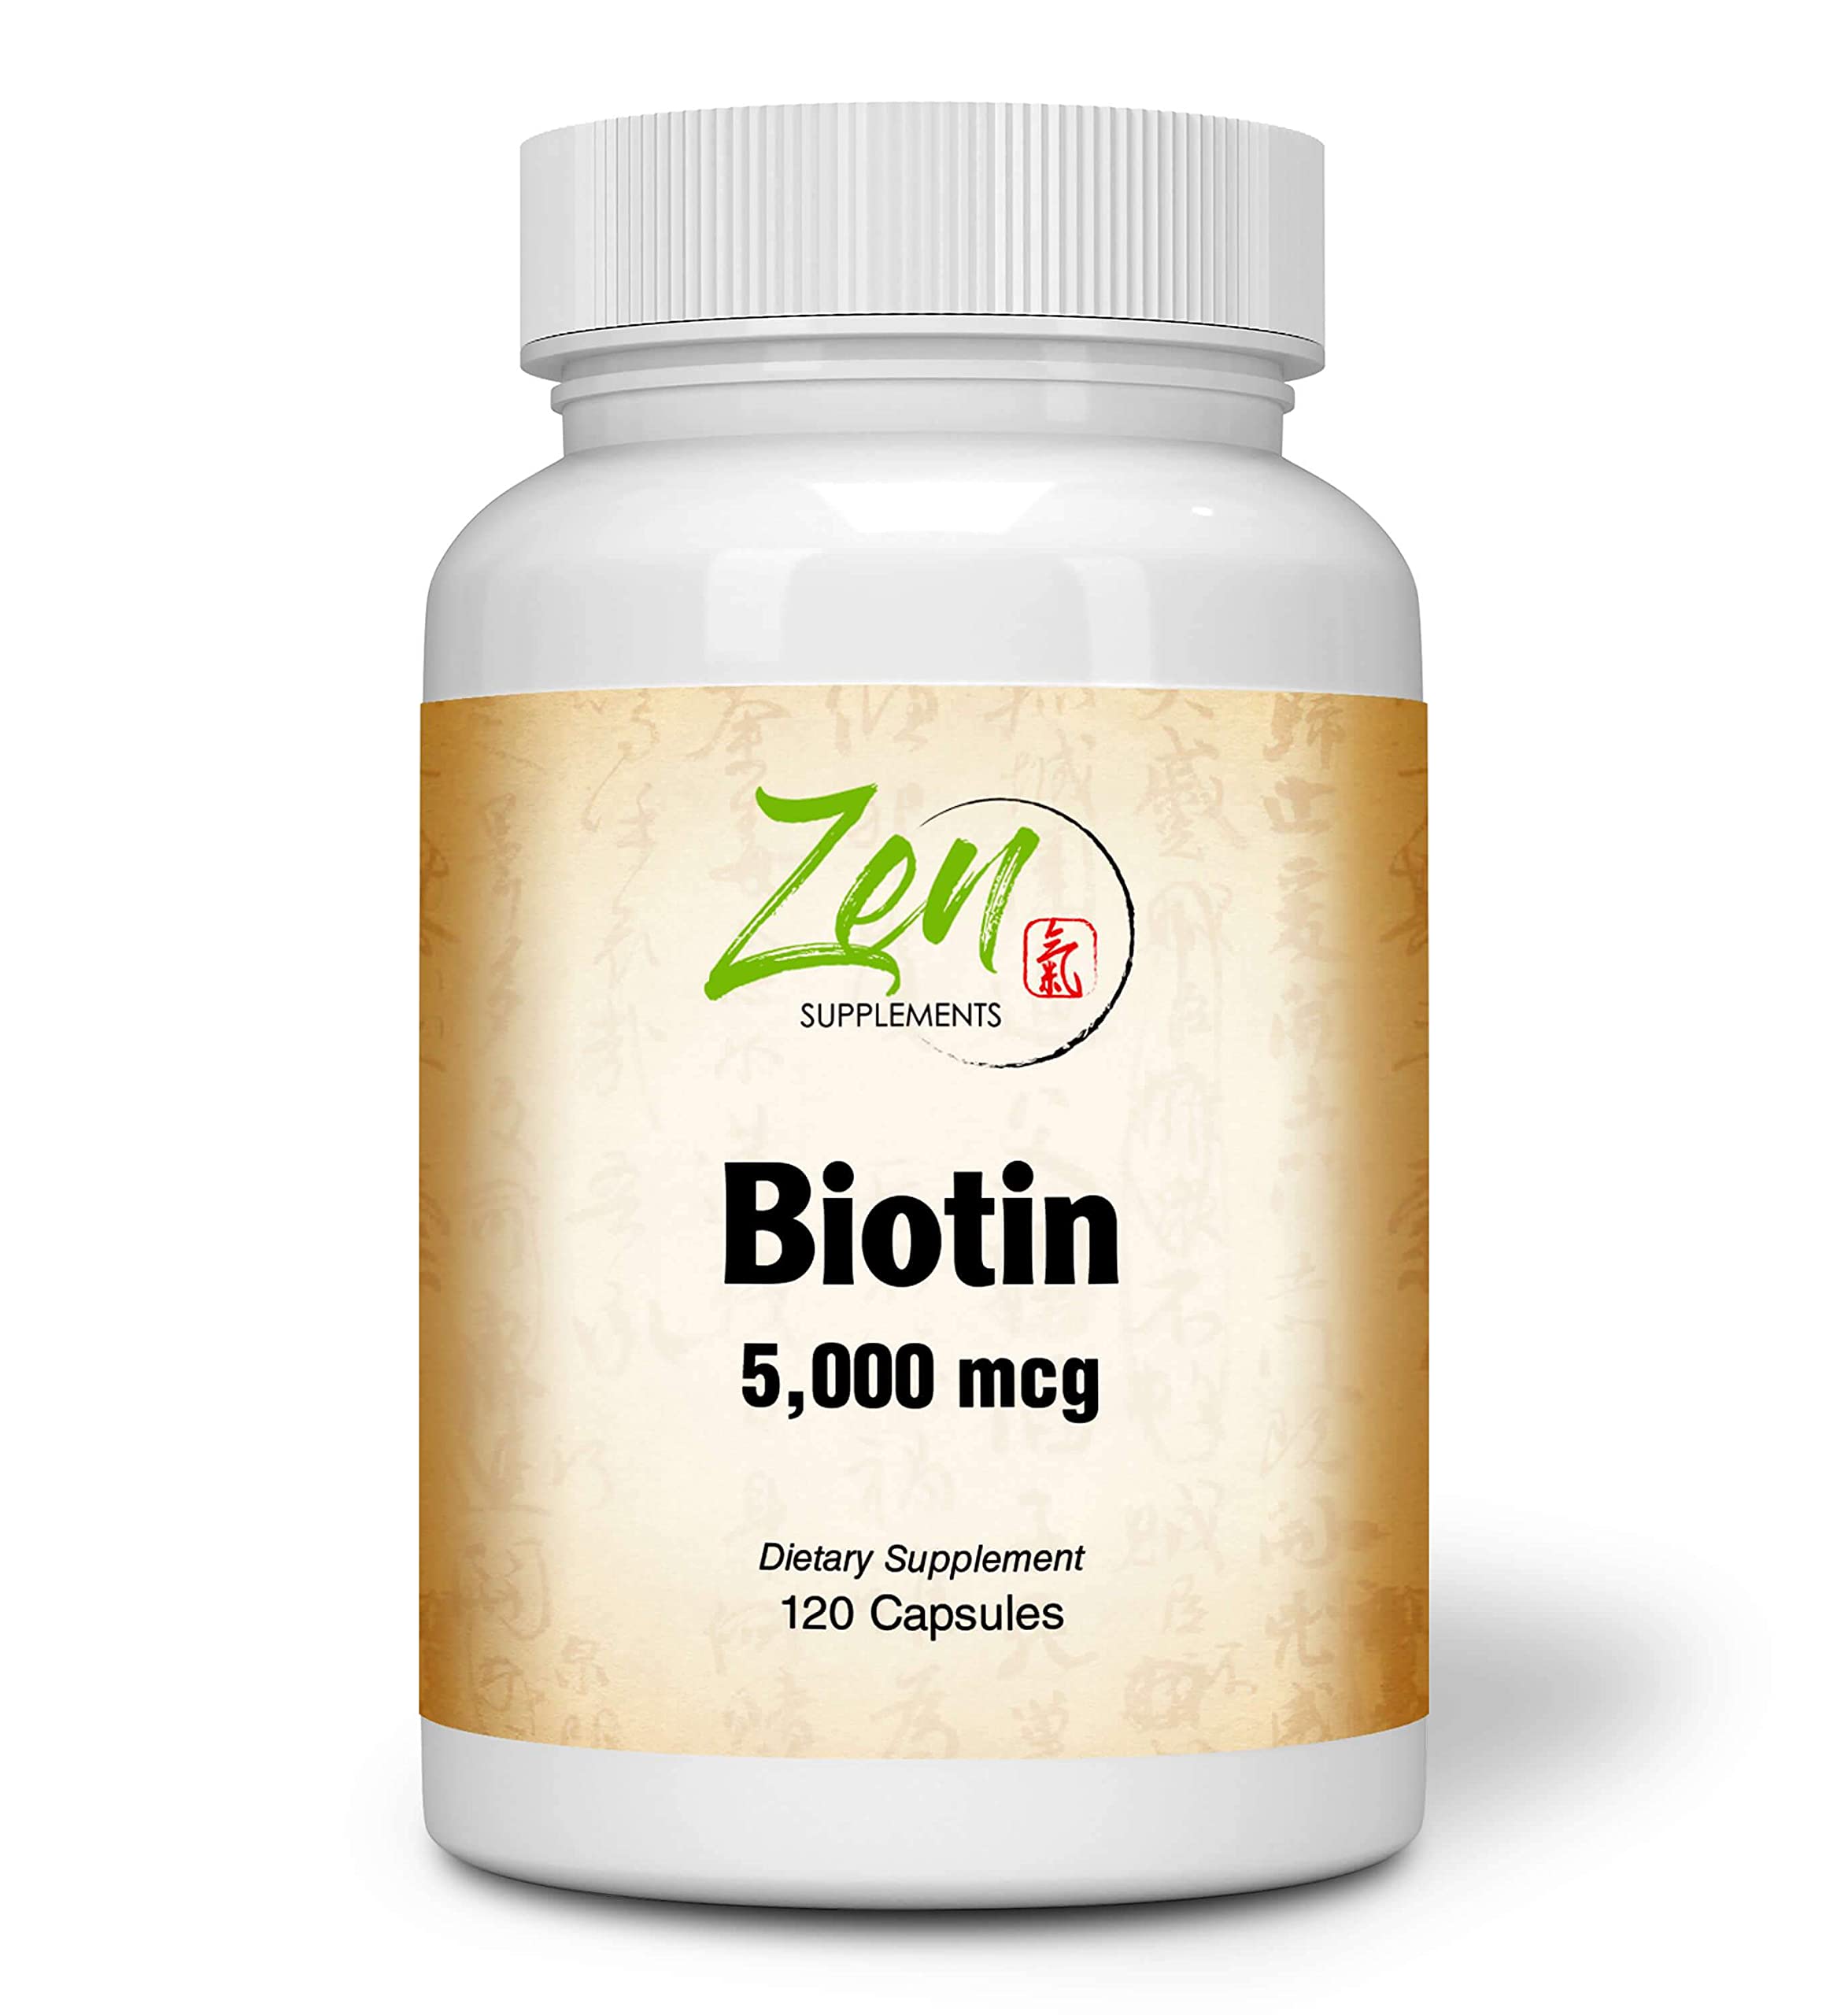 Zen Supplements - Biotin 5000 Mcg 120-Caps - Supports Healthy Hair, Skin & Nails in Individuals w/ Biotin Deficiency - May Provide for Support Hair Growth